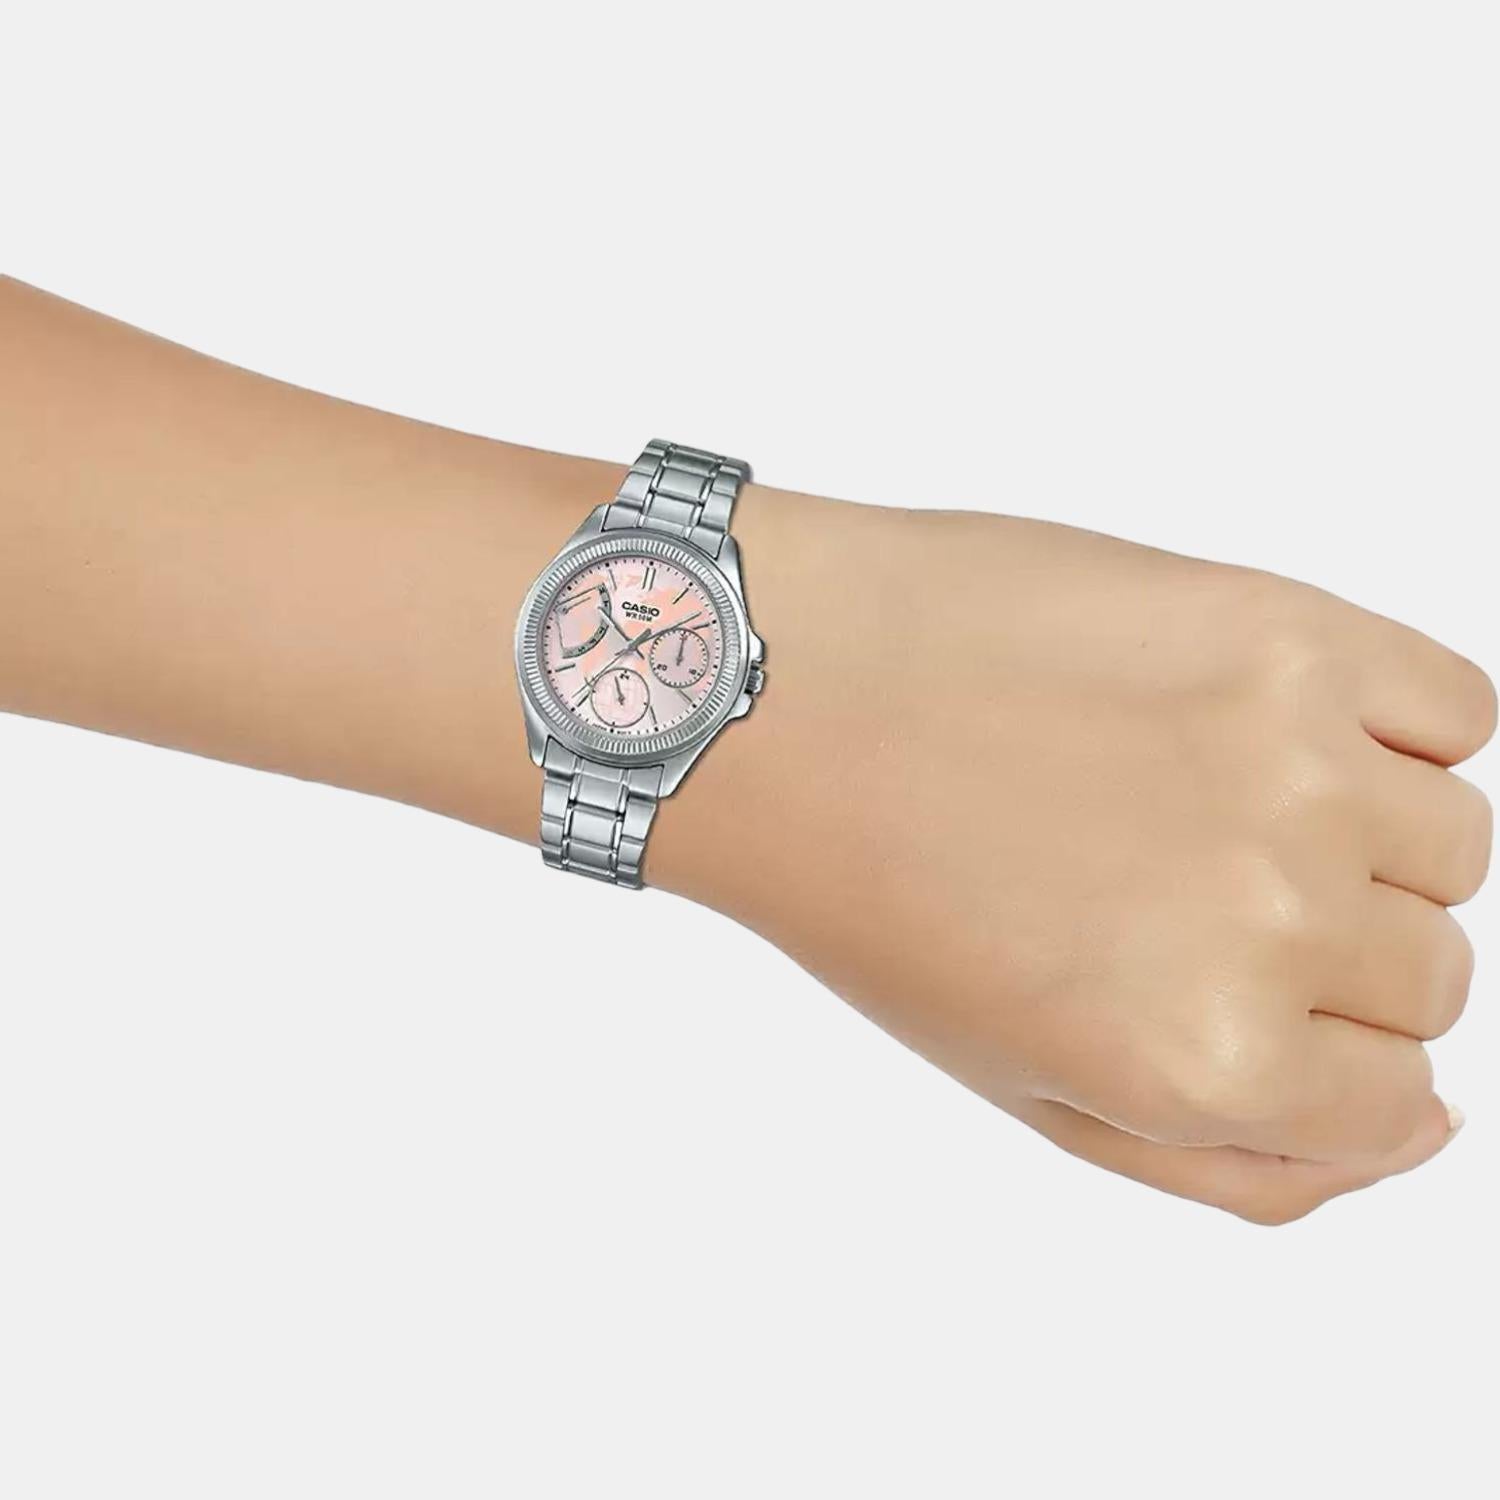 casio-stainless-steel-pink-analog-womens-watch-watch-a1577